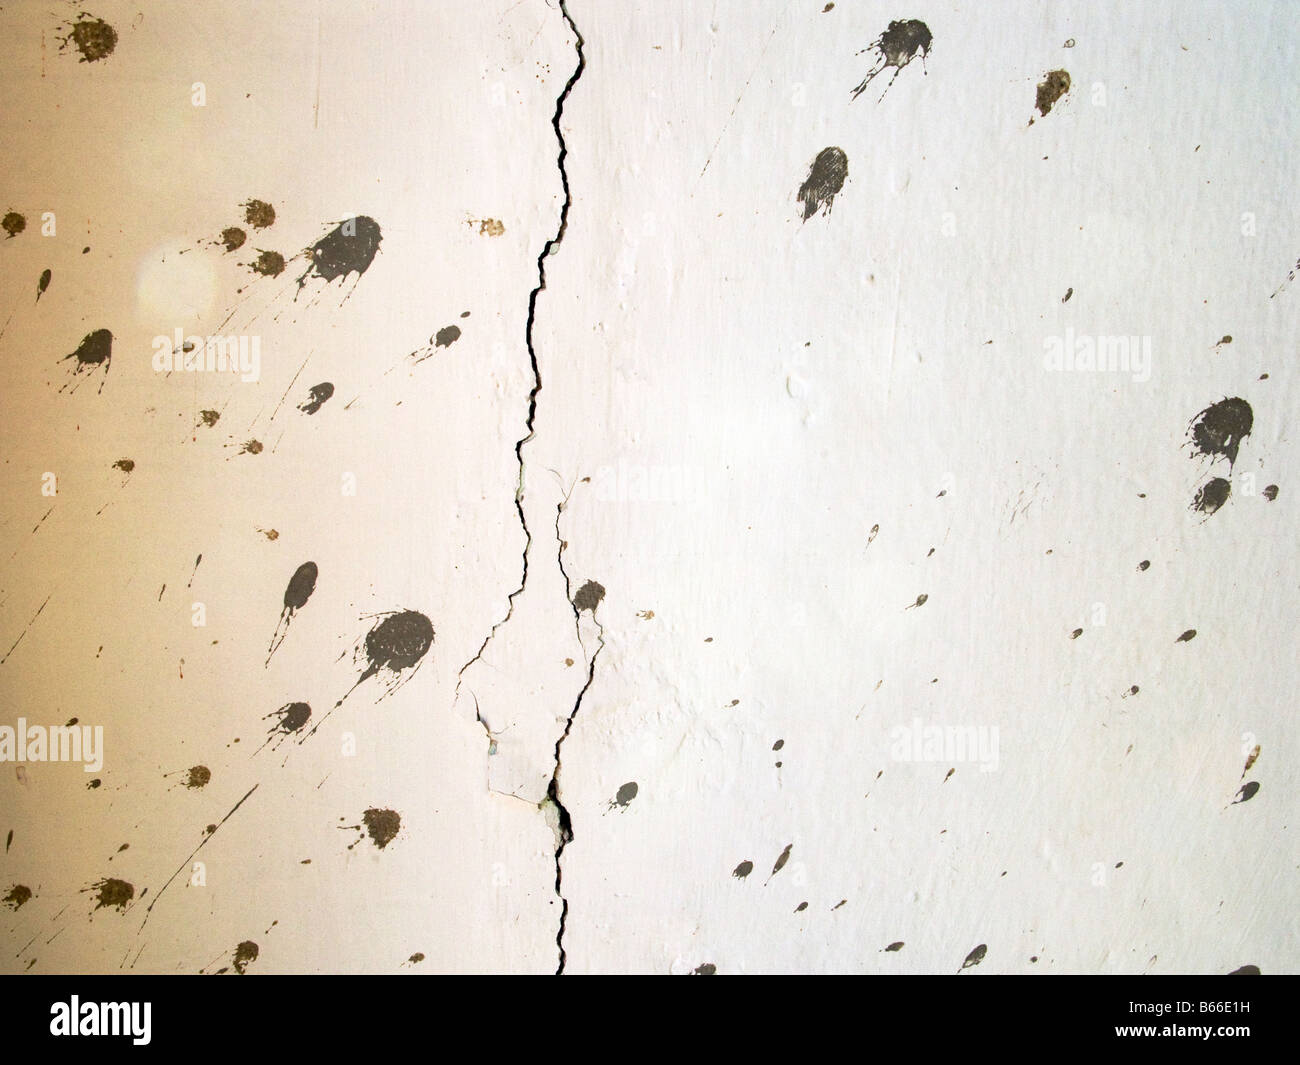 Cracked wall with splattered cement Stock Photo